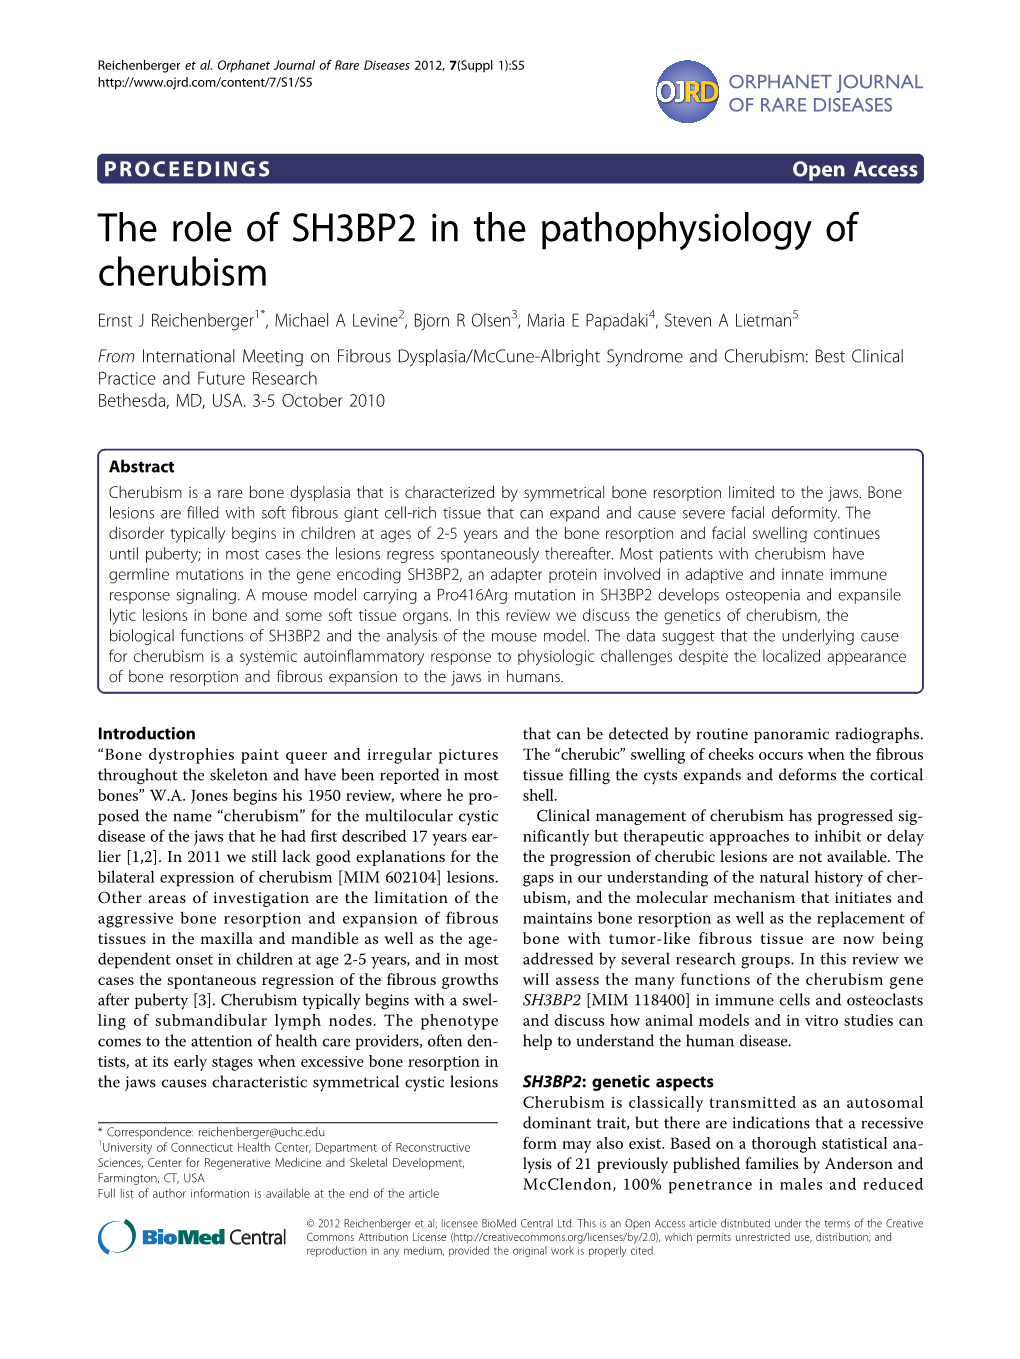 View We Discuss the Genetics of Cherubism, the Biological Functions of SH3BP2 and the Analysis of the Mouse Model